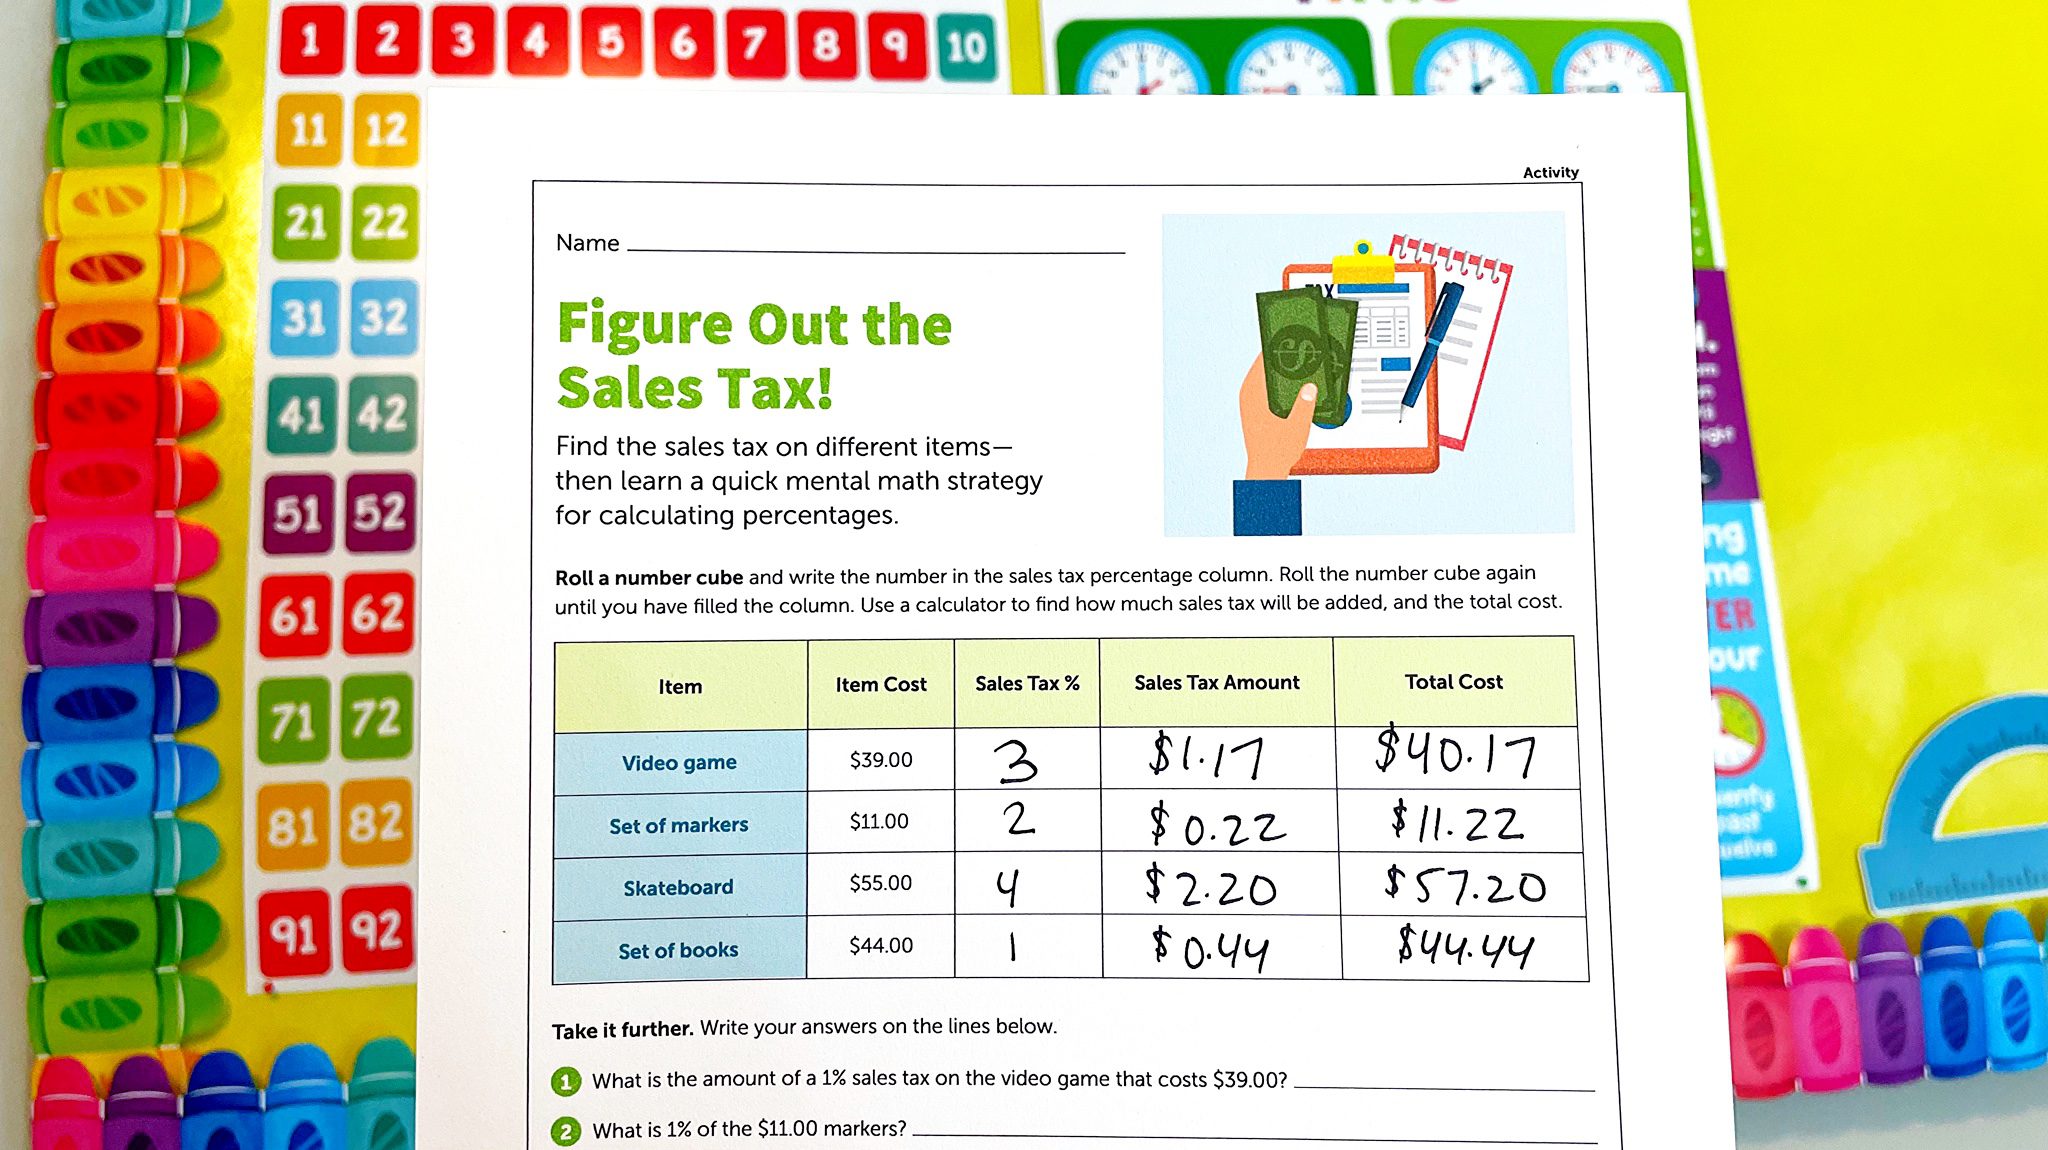 (opens in a new tab) Flay lay of 'Calculating Sales Tax' lesson